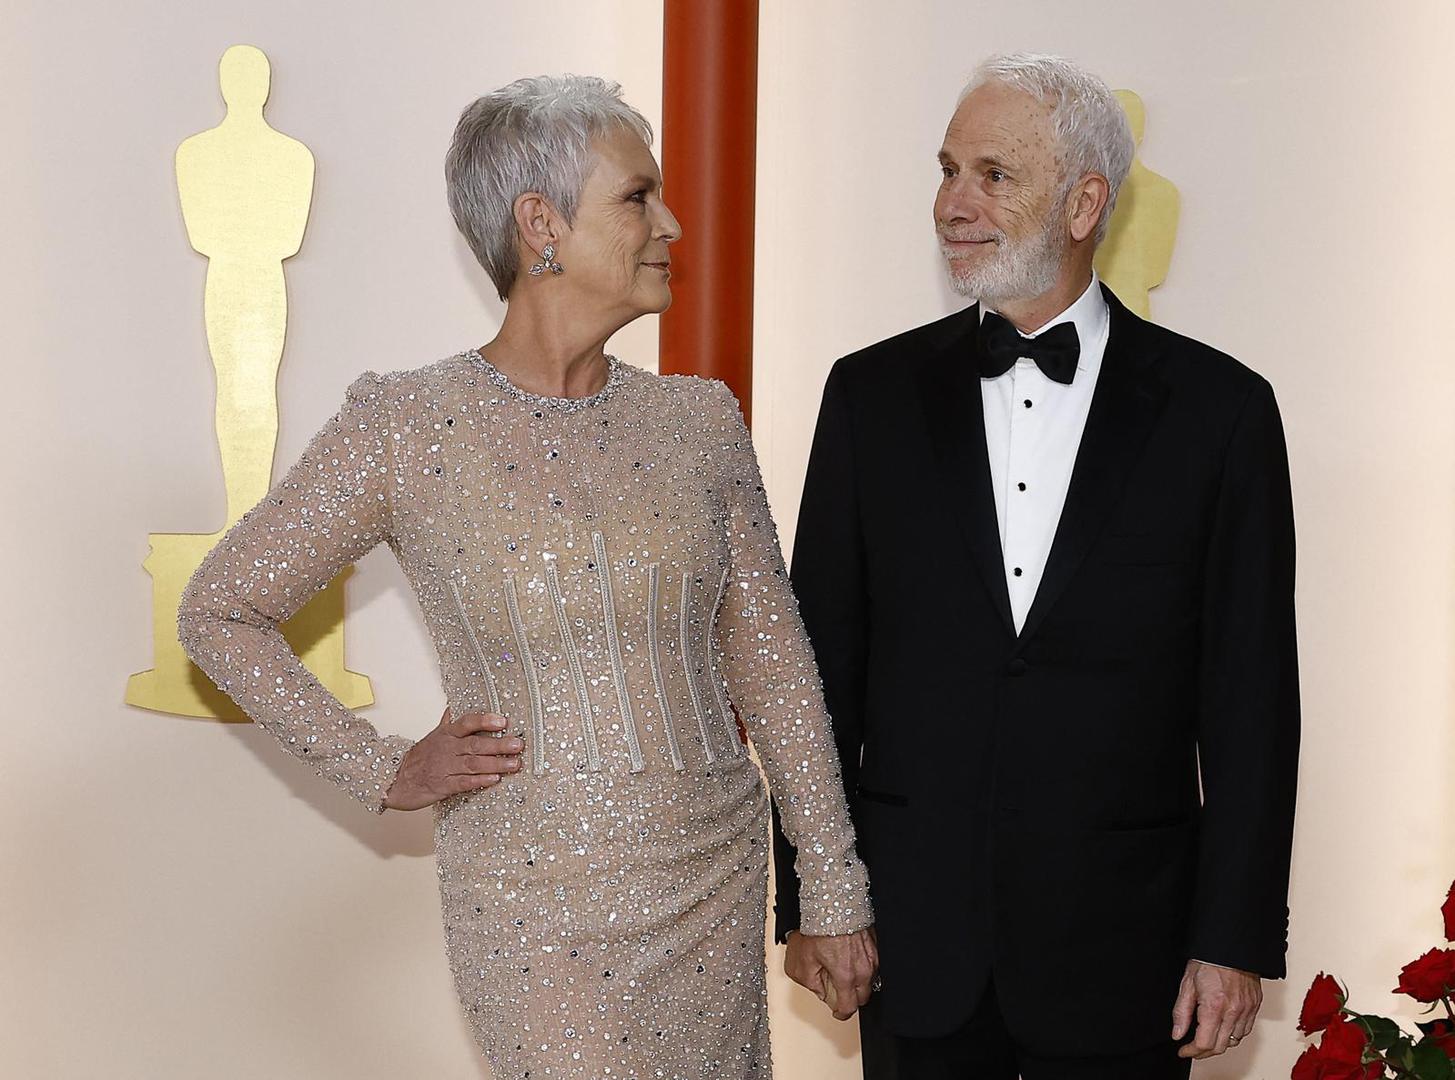 Jamie Lee Curtis and her husband Christopher Guest pose on the champagne-colored red carpet during the Oscars arrivals at the 95th Academy Awards in Hollywood, Los Angeles, California, U.S., March 12, 2023. REUTERS/Eric Gaillard Photo: ERIC GAILLARD/REUTERS